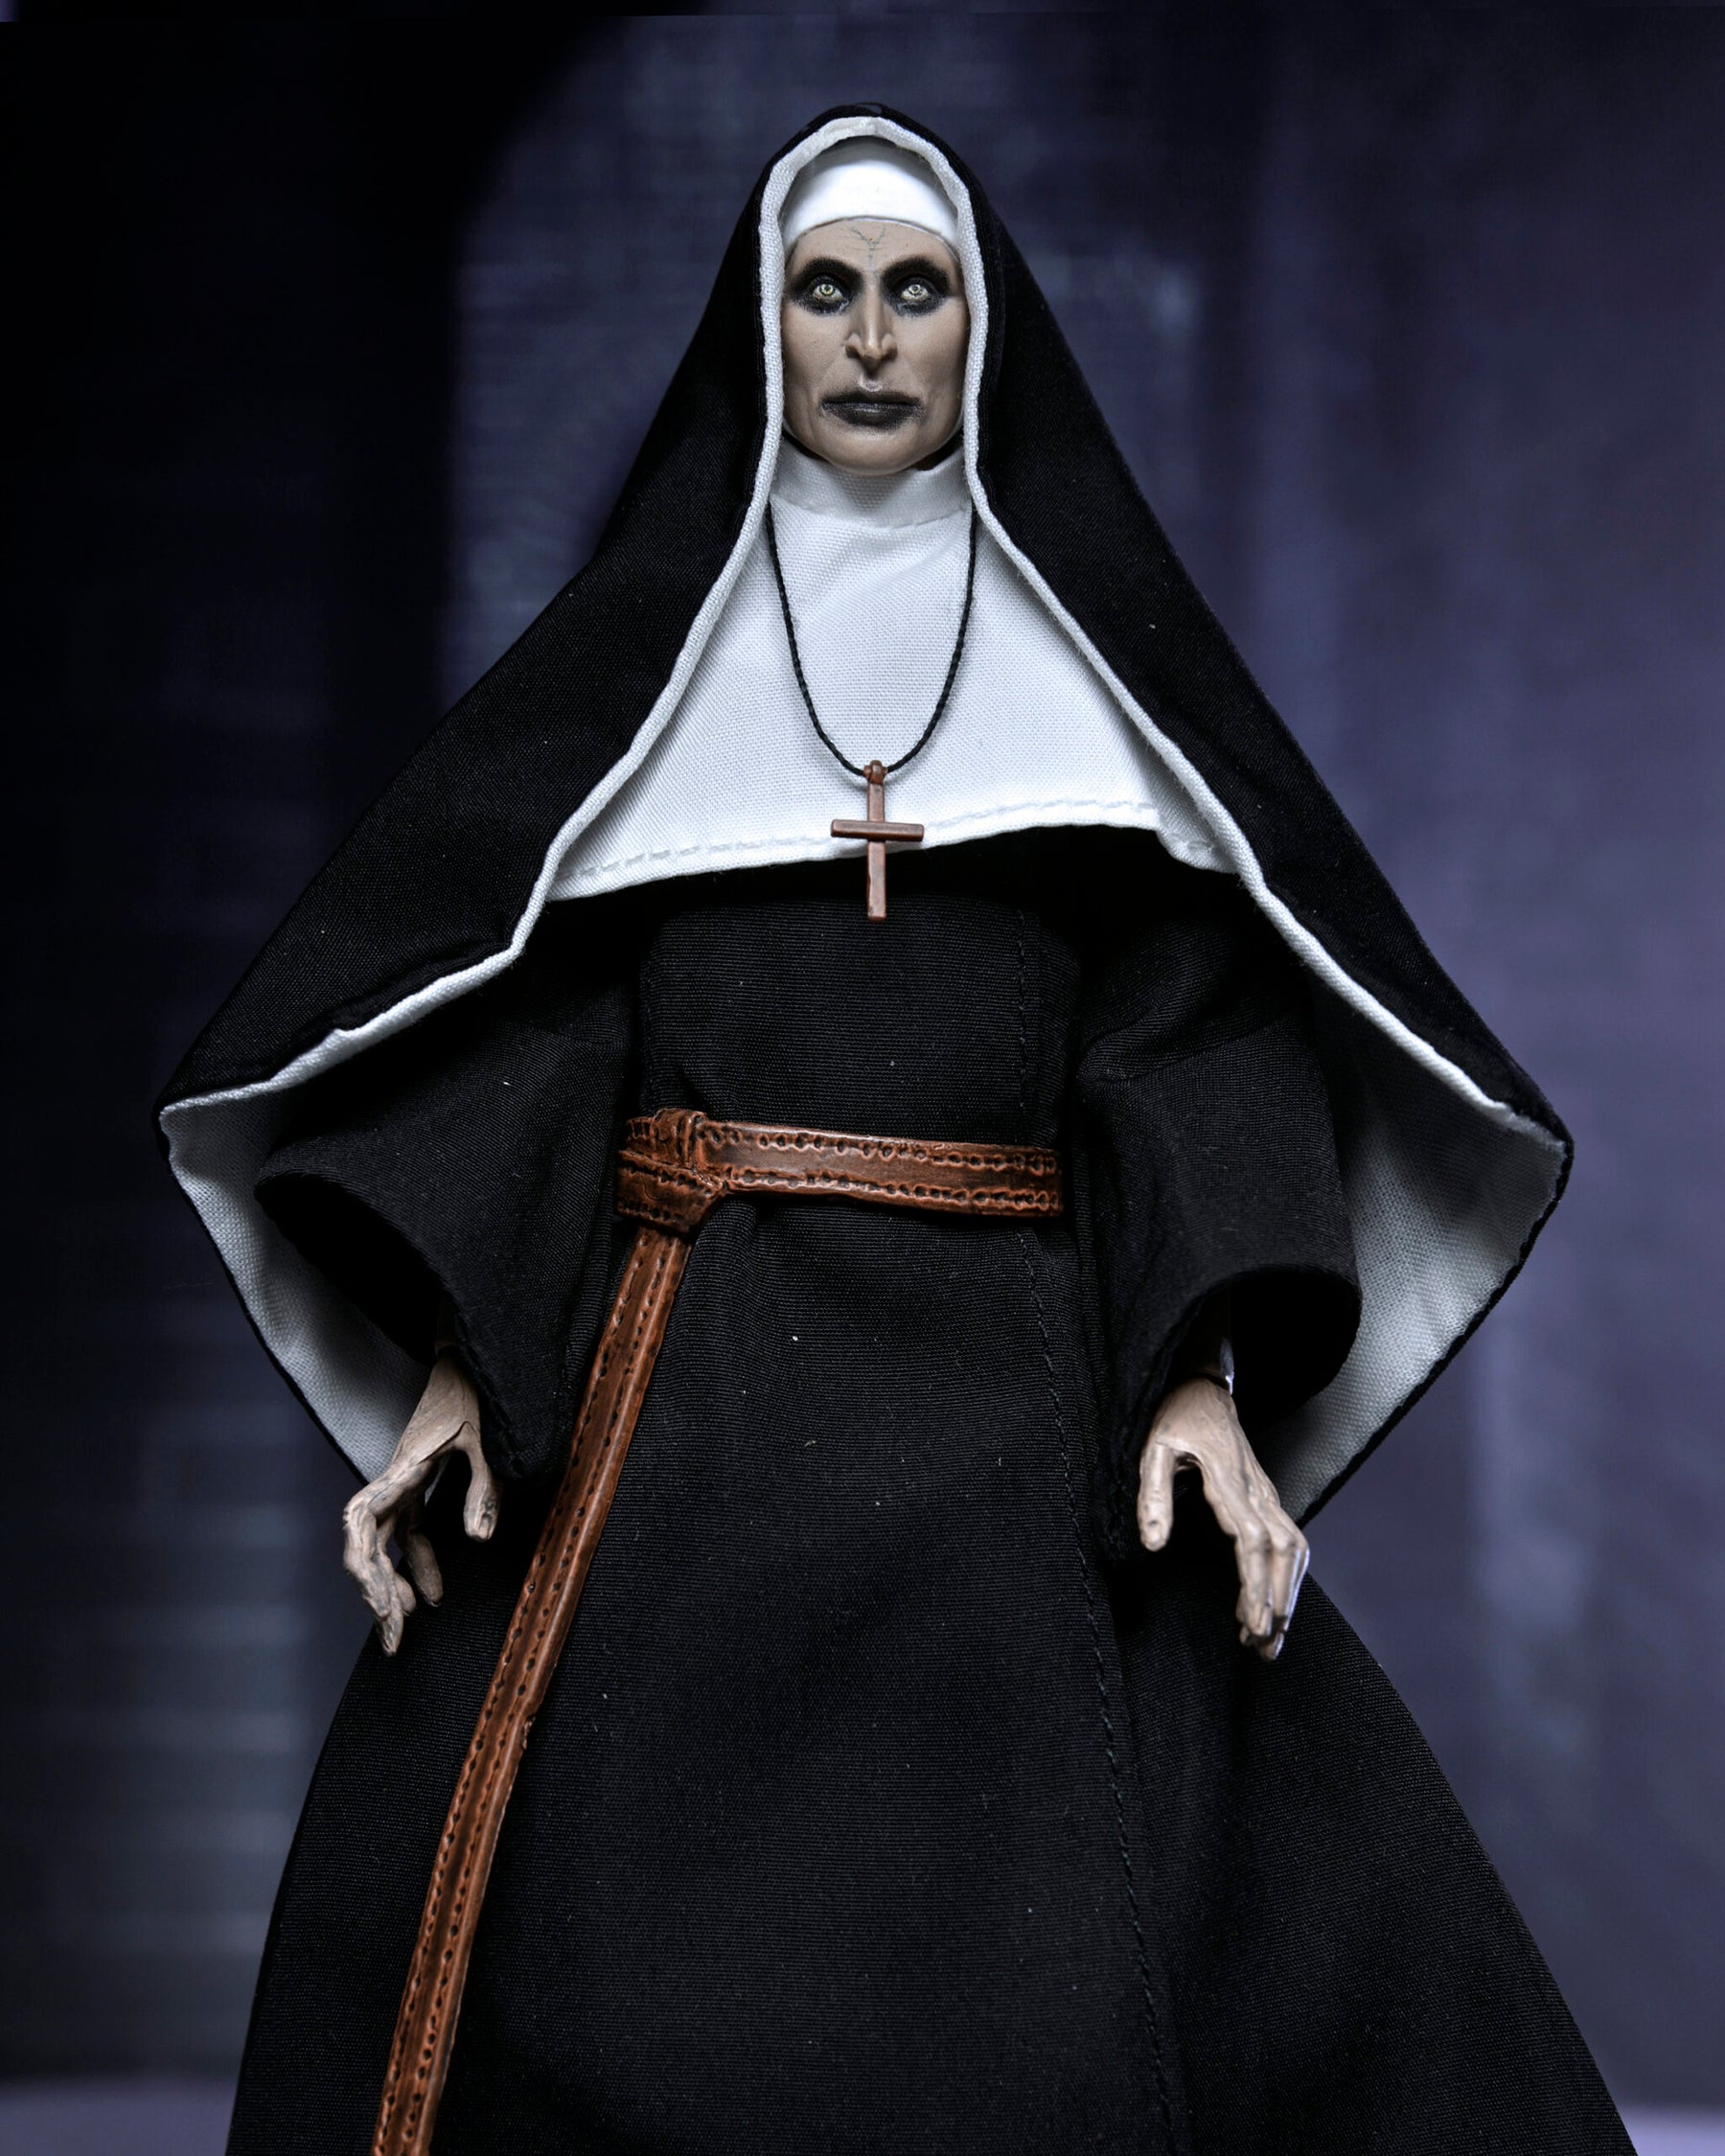 NECA - The Conjuring Universe - Ultimate Valak (The Nun) 7" Action Figure (Pre-Order Ships October)